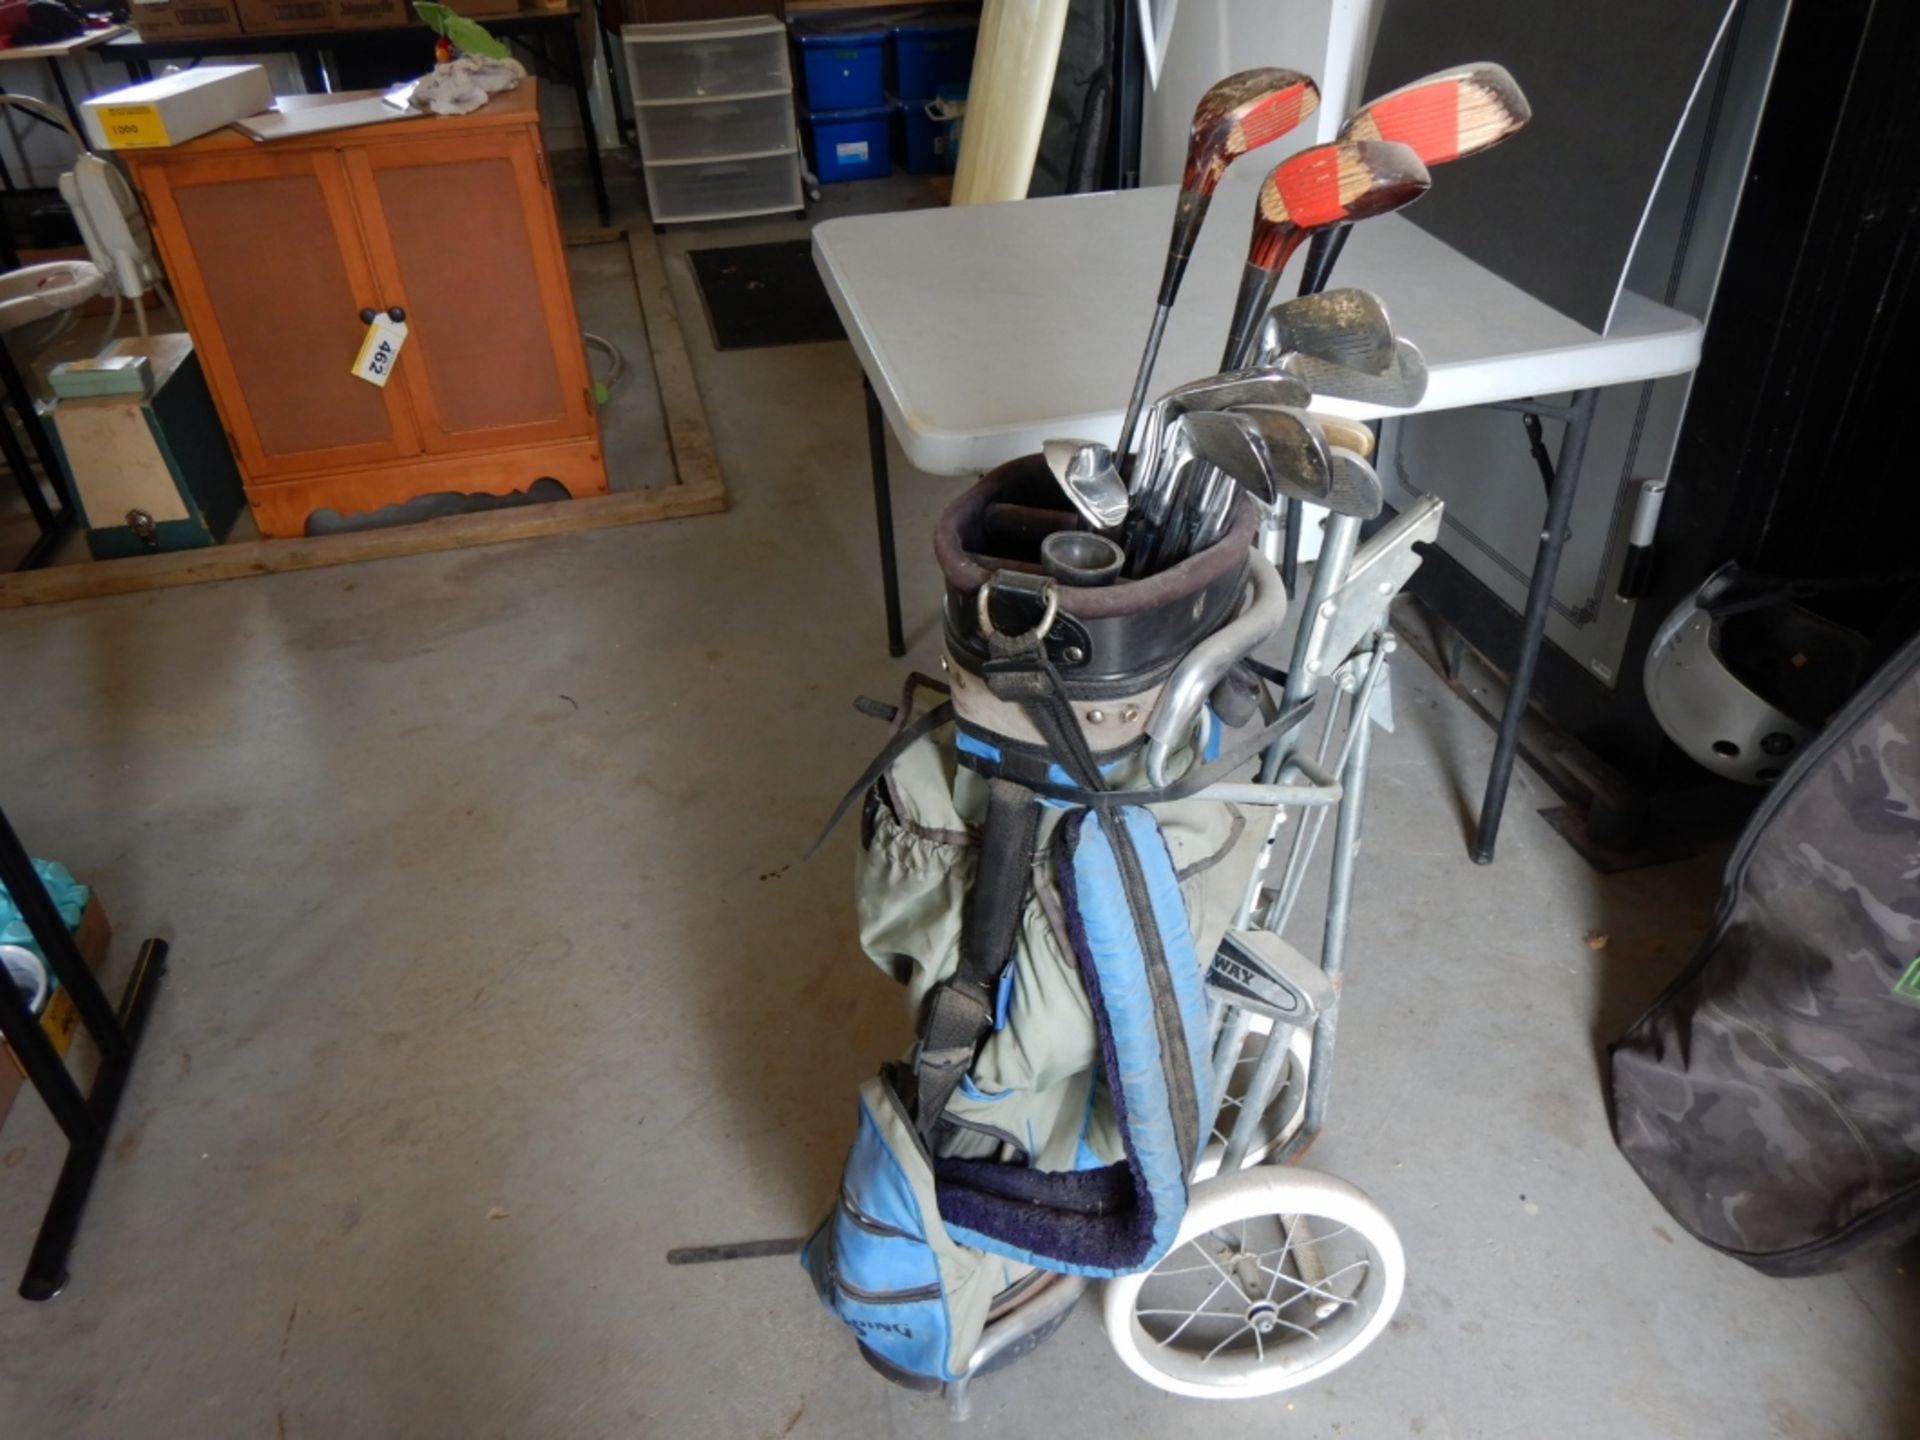 SET OF VINTAGE GOLF CLUBS W/ BAG AND RICSHAW - Image 2 of 3